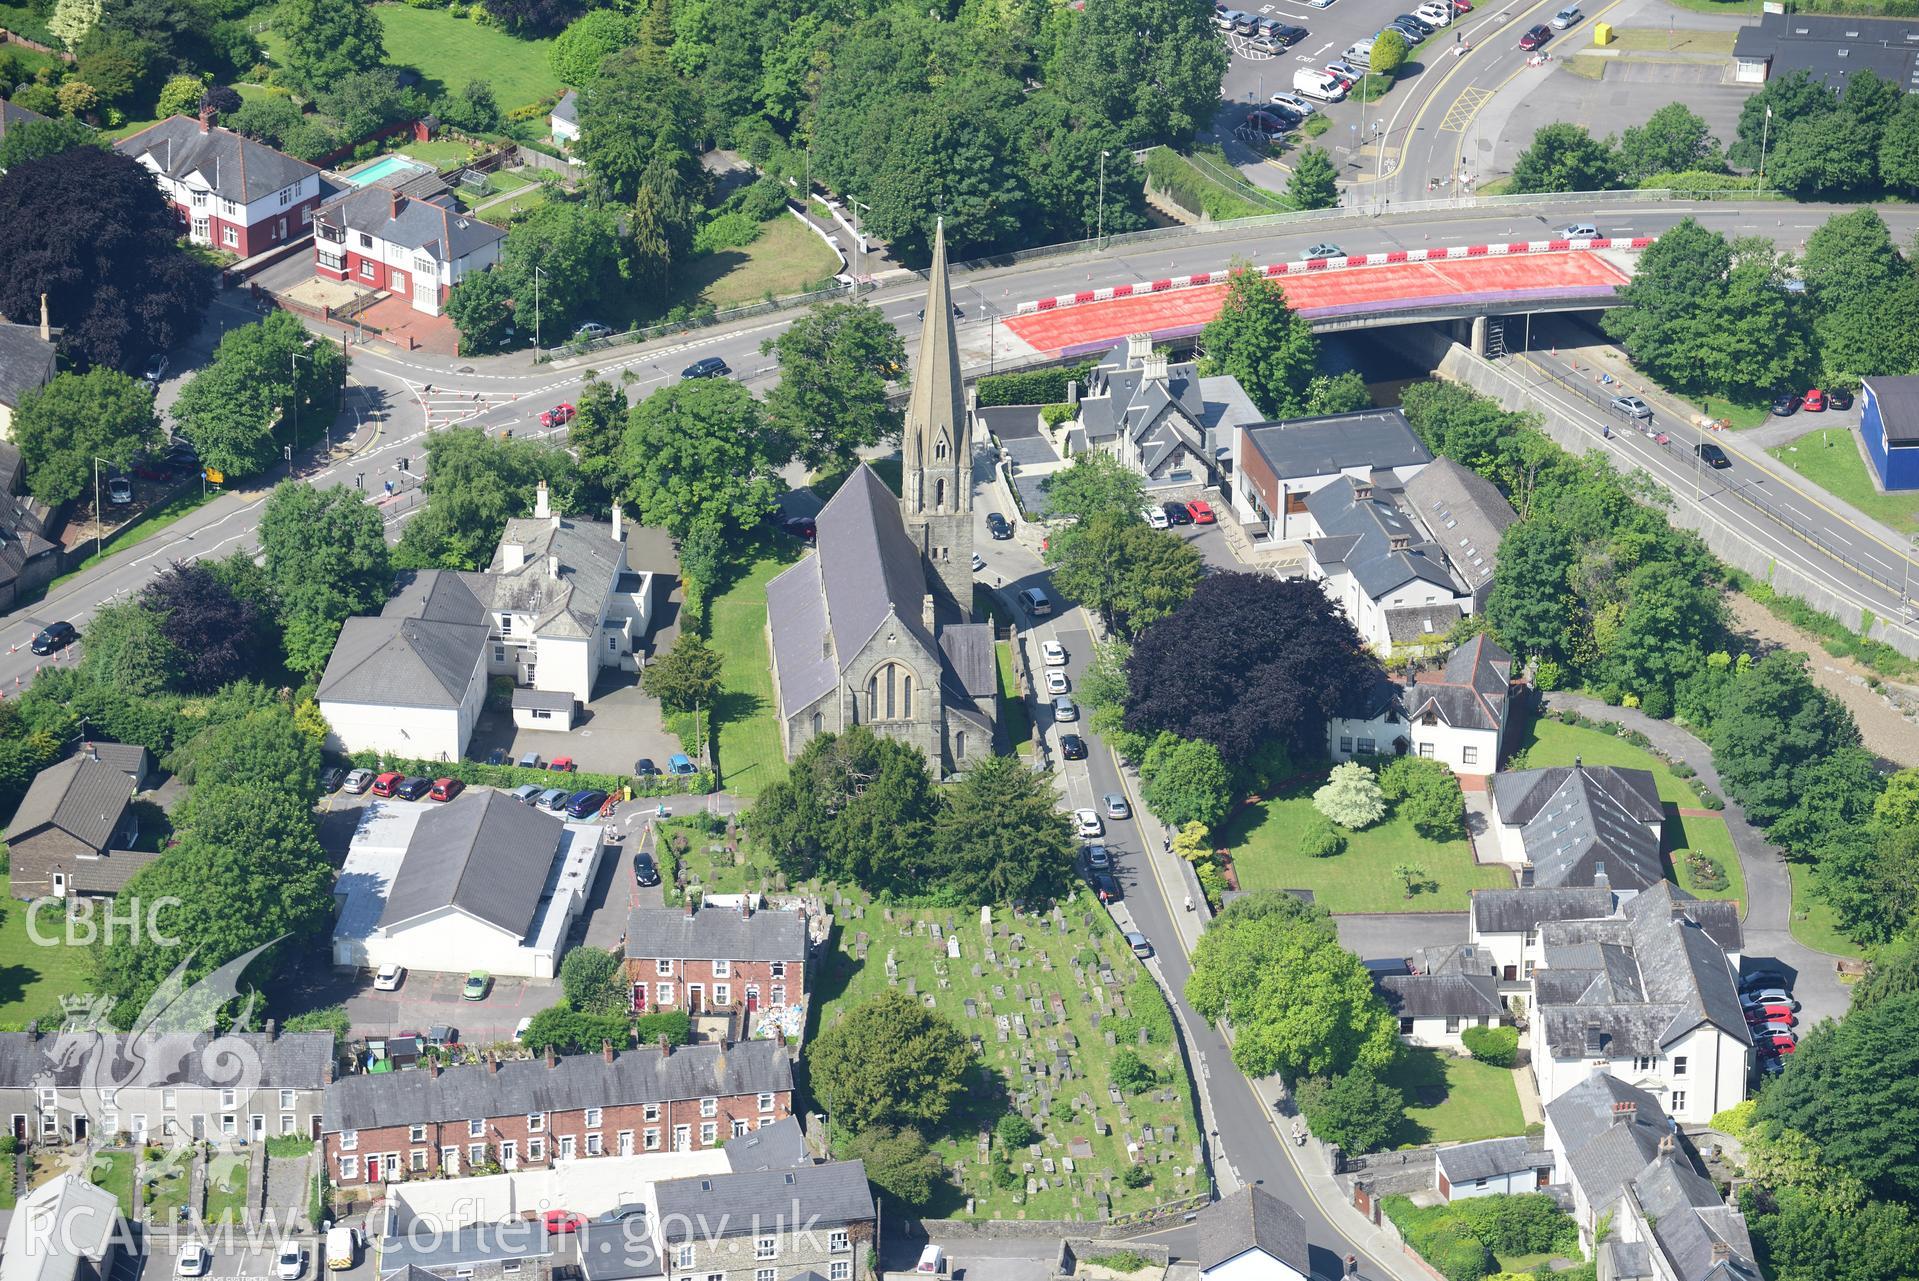 St. Mary's church, Bridgend. Oblique aerial photograph taken during the Royal Commission's programme of archaeological aerial reconnaissance by Toby Driver on 19th June 2015.